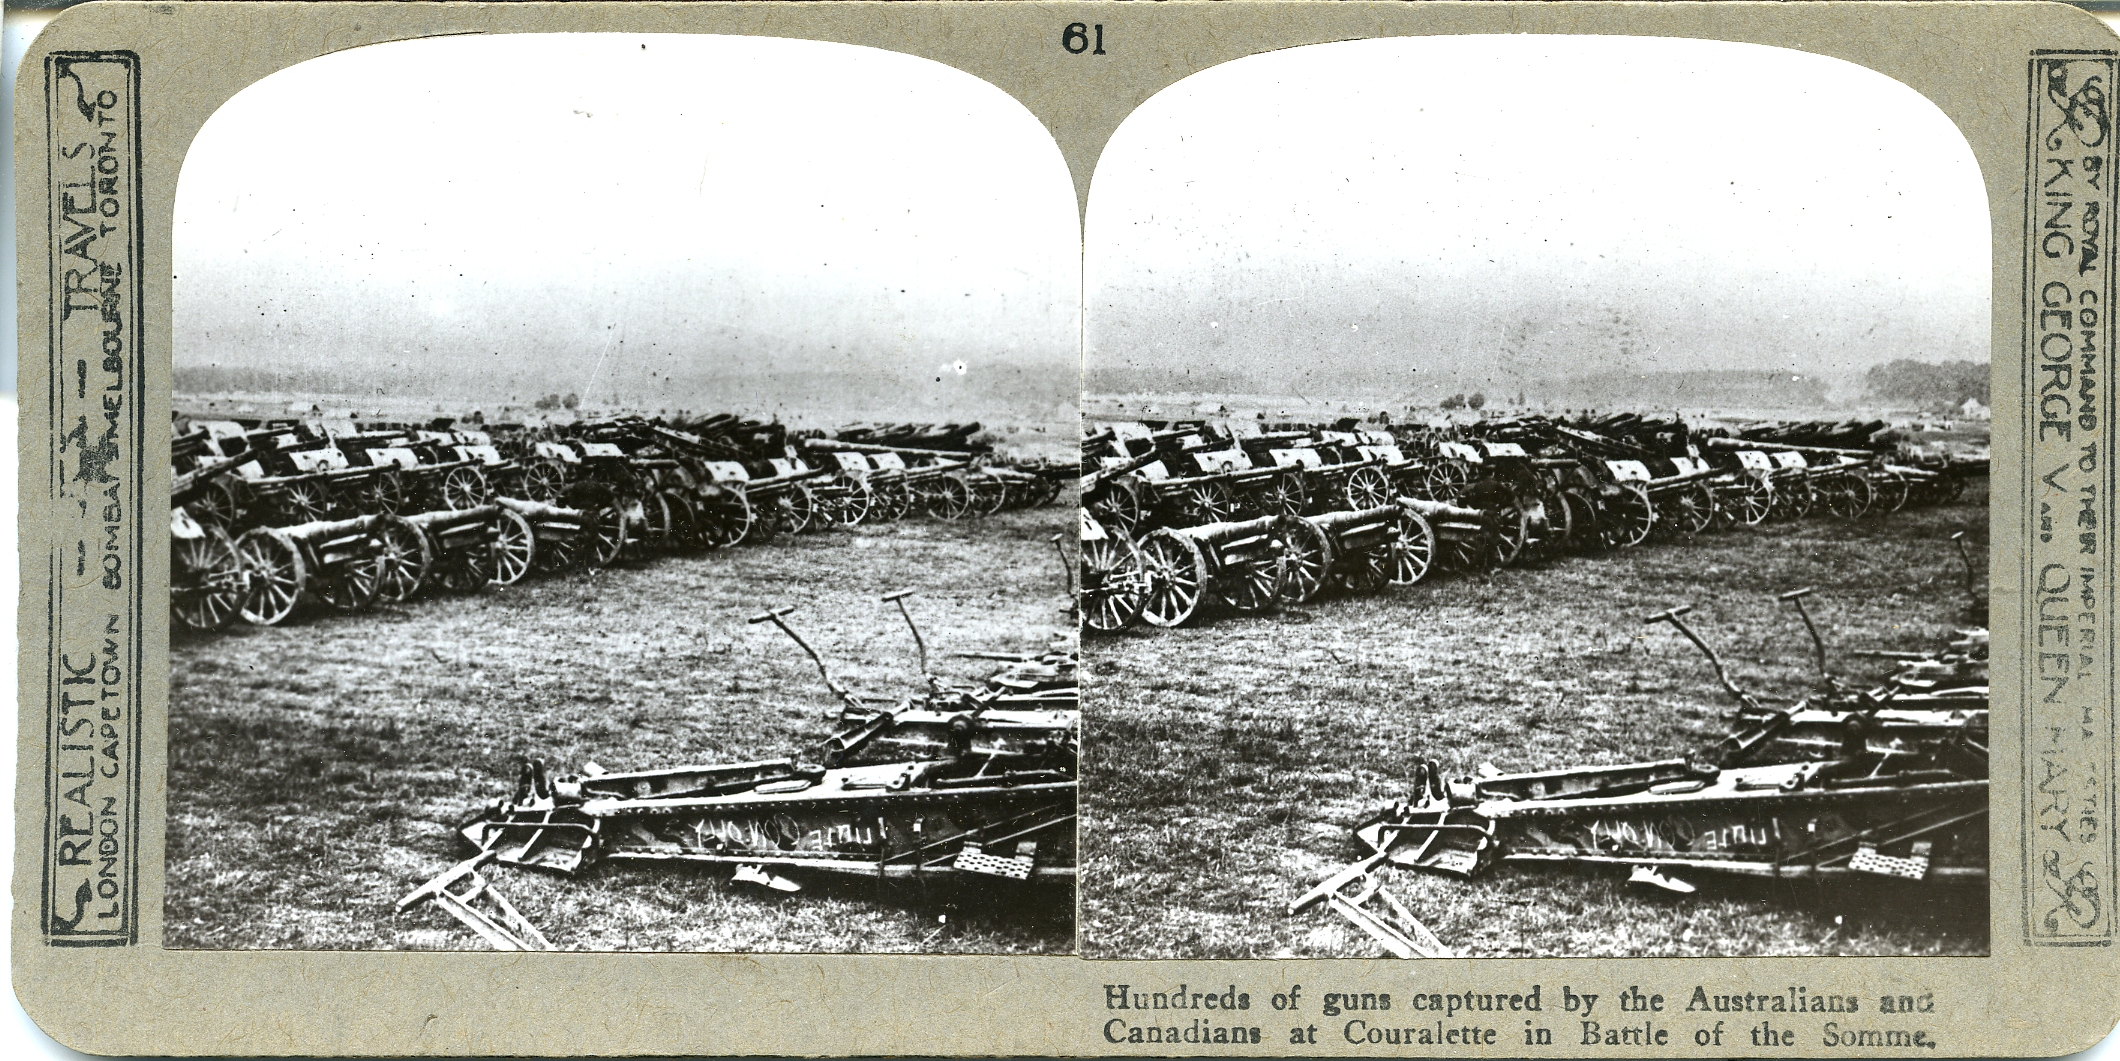 Hundreds of guns captured by Australians and Canadians at Courcelette in Battle of Somme